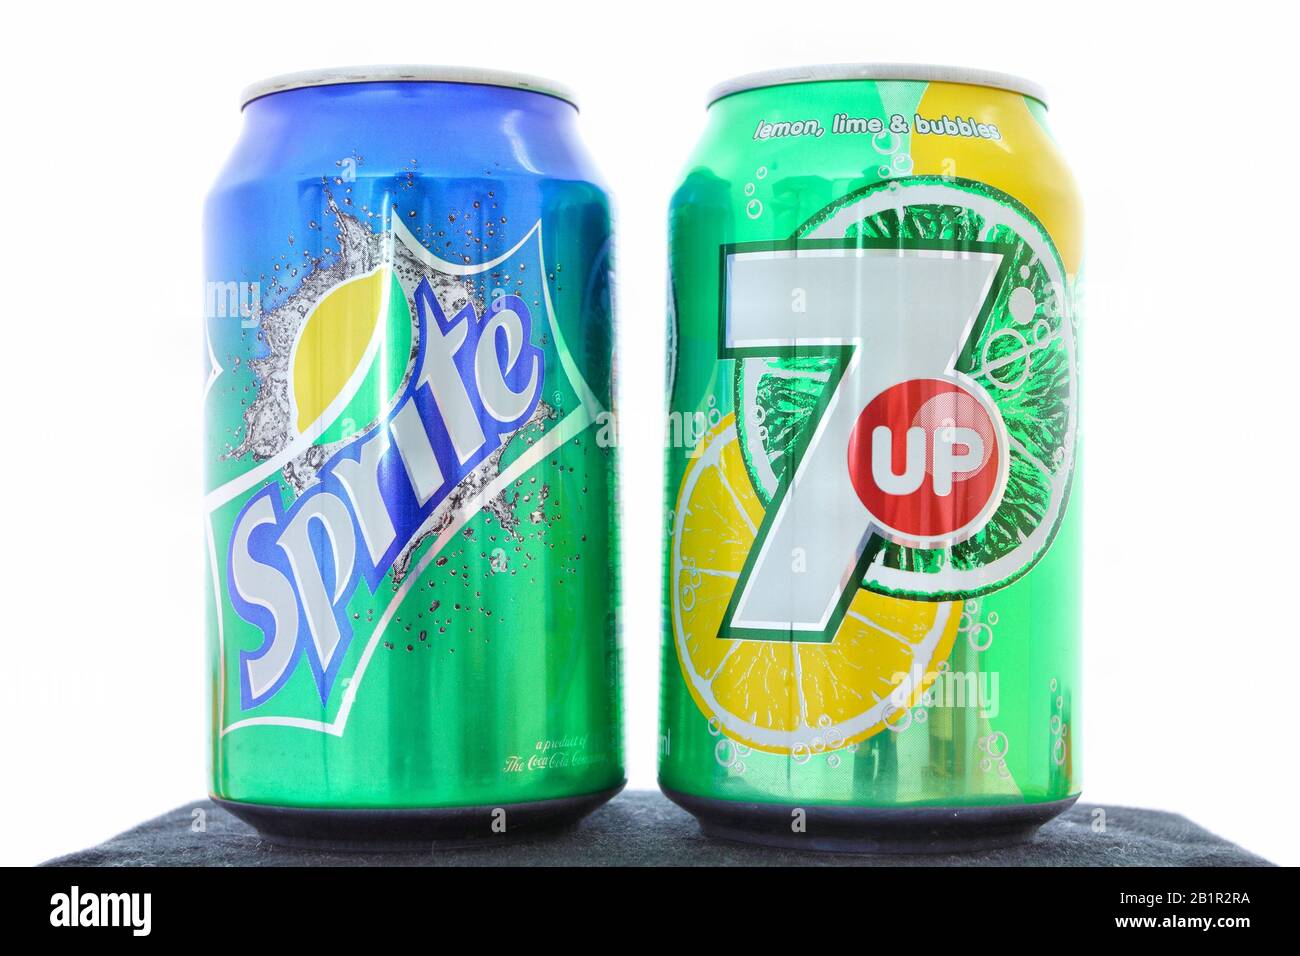 WARSAW, POLAND - MAY 20, 2010: Sprite and 7 Up canned soft drinks together. These drinks are part of legendary competition between Coca-Cola and Pepsi Stock Photo